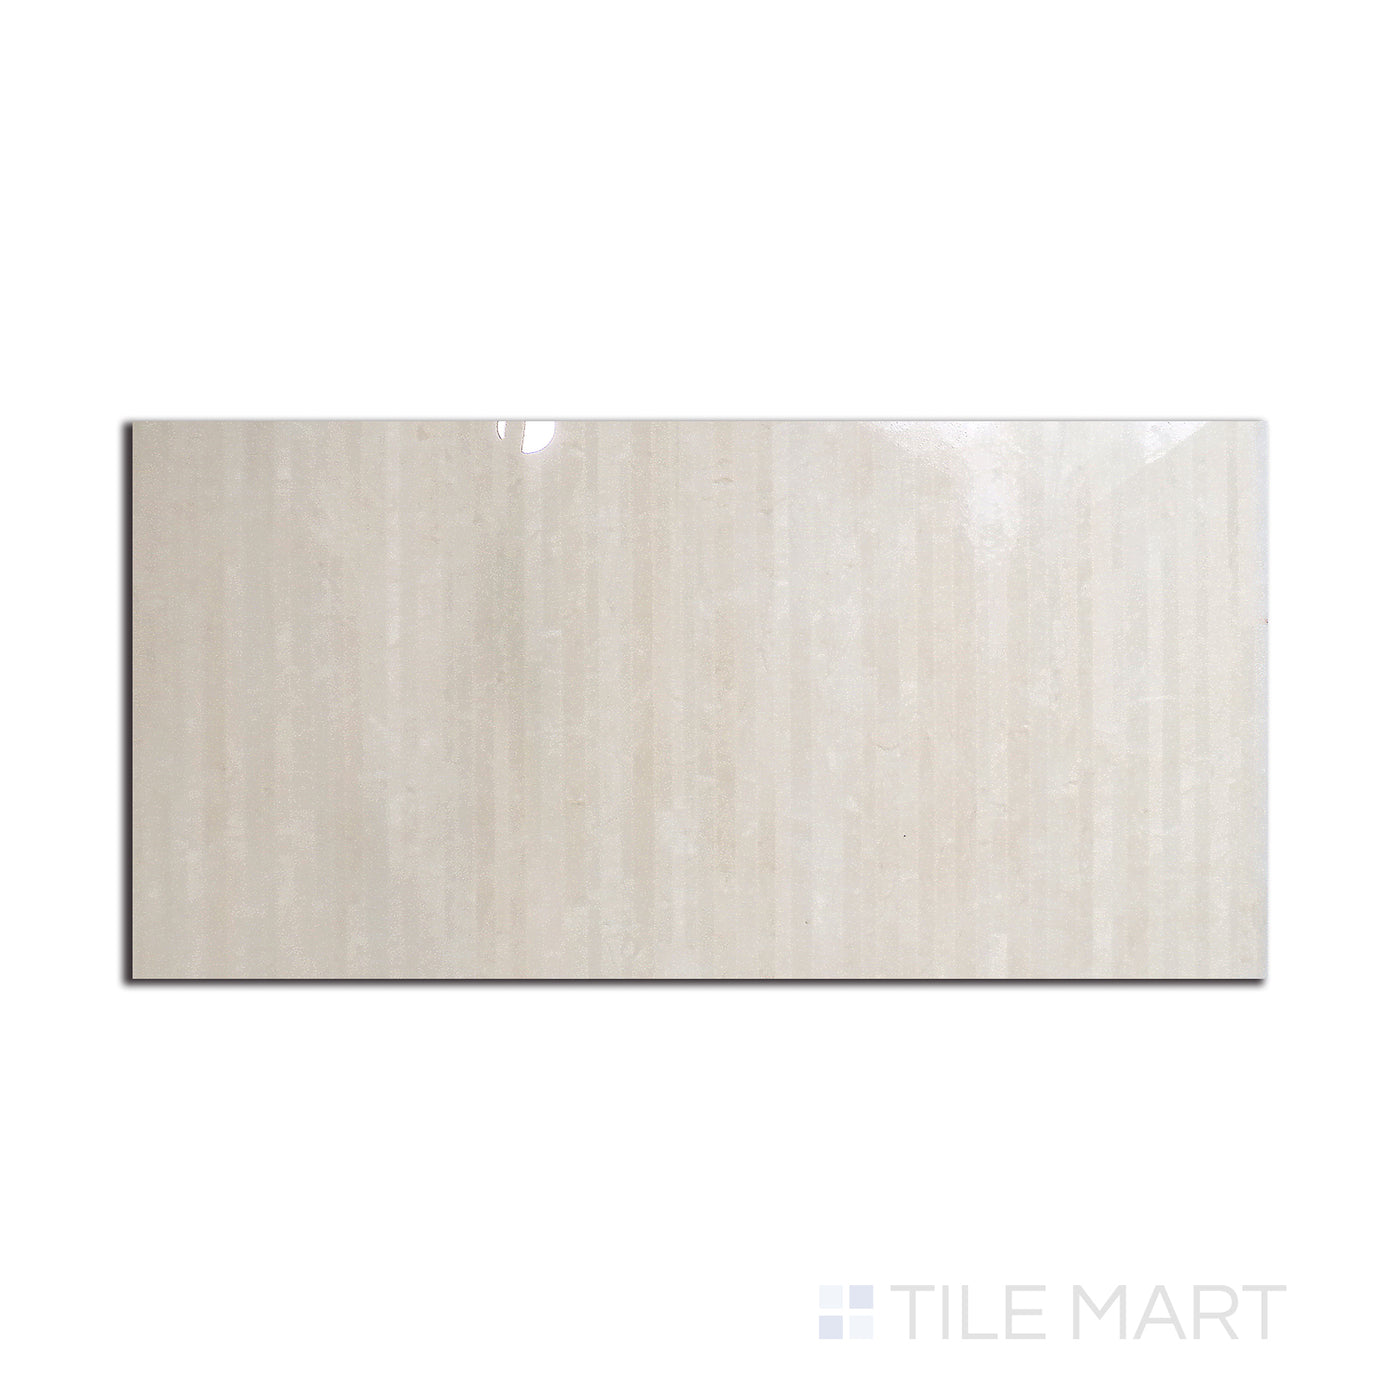 Tele Di Marmo Reloaded Porcelain Large Format Decorative Field 24X48 Marfil Doghe